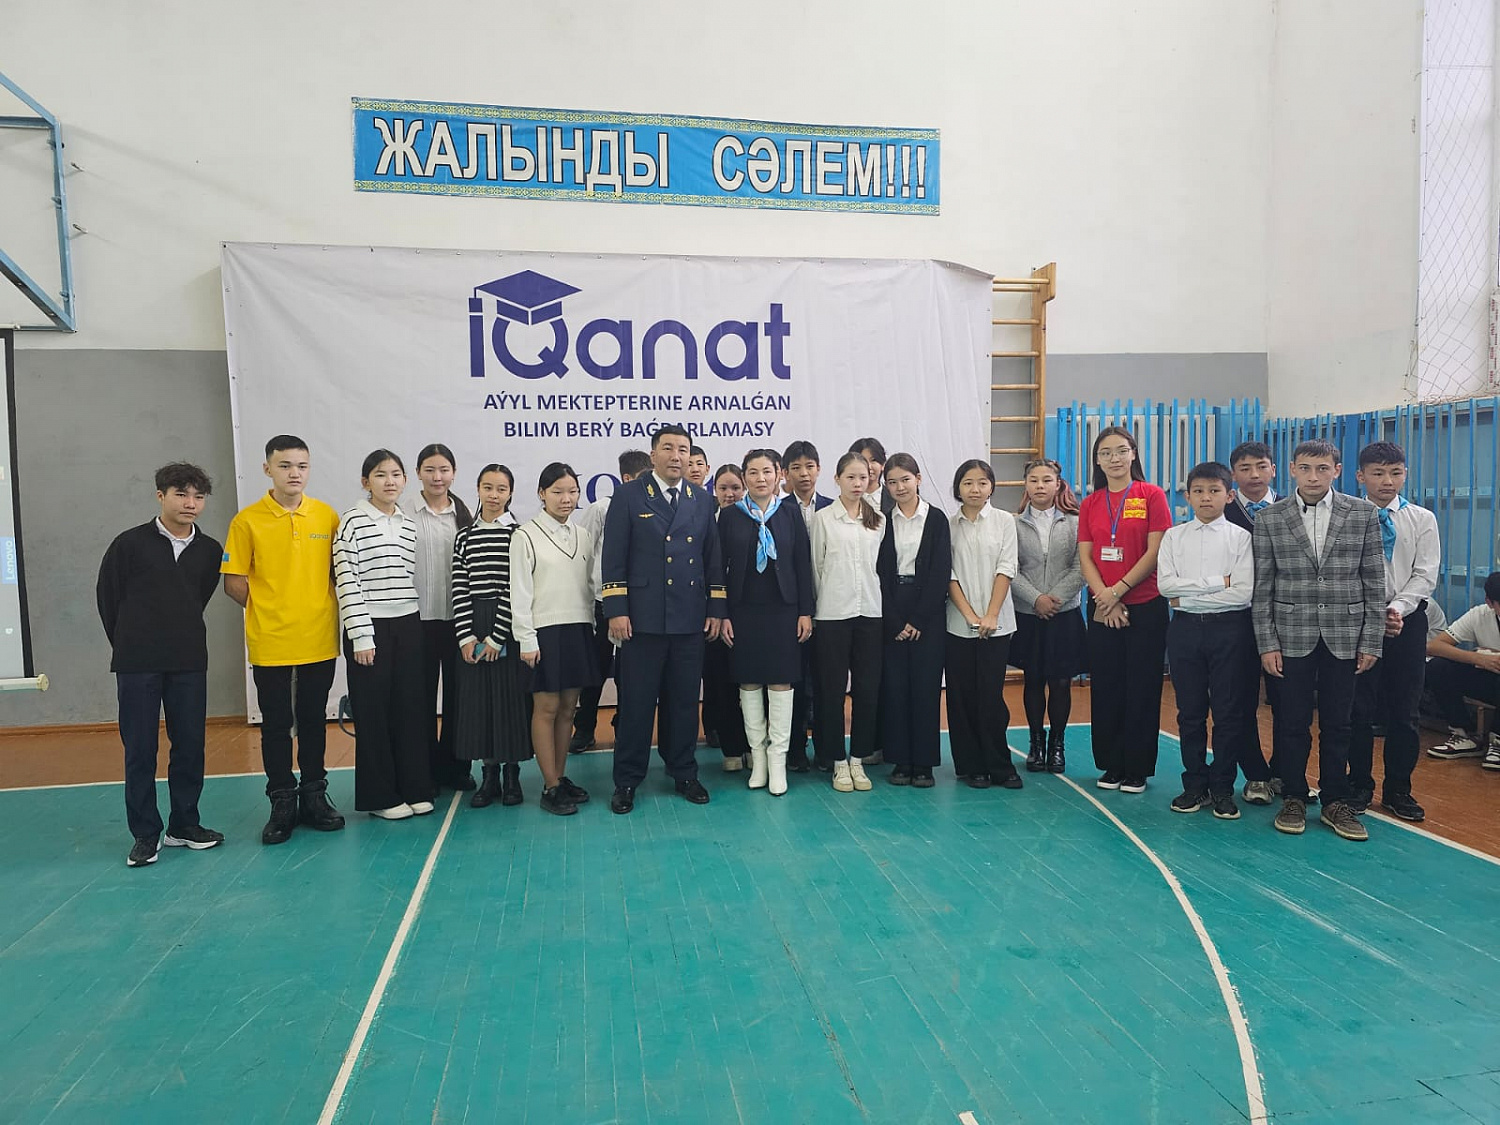 IQanat is a unique educational and social project aimed at providing opportunities for all rural schoolchildren in the country to get quality education.